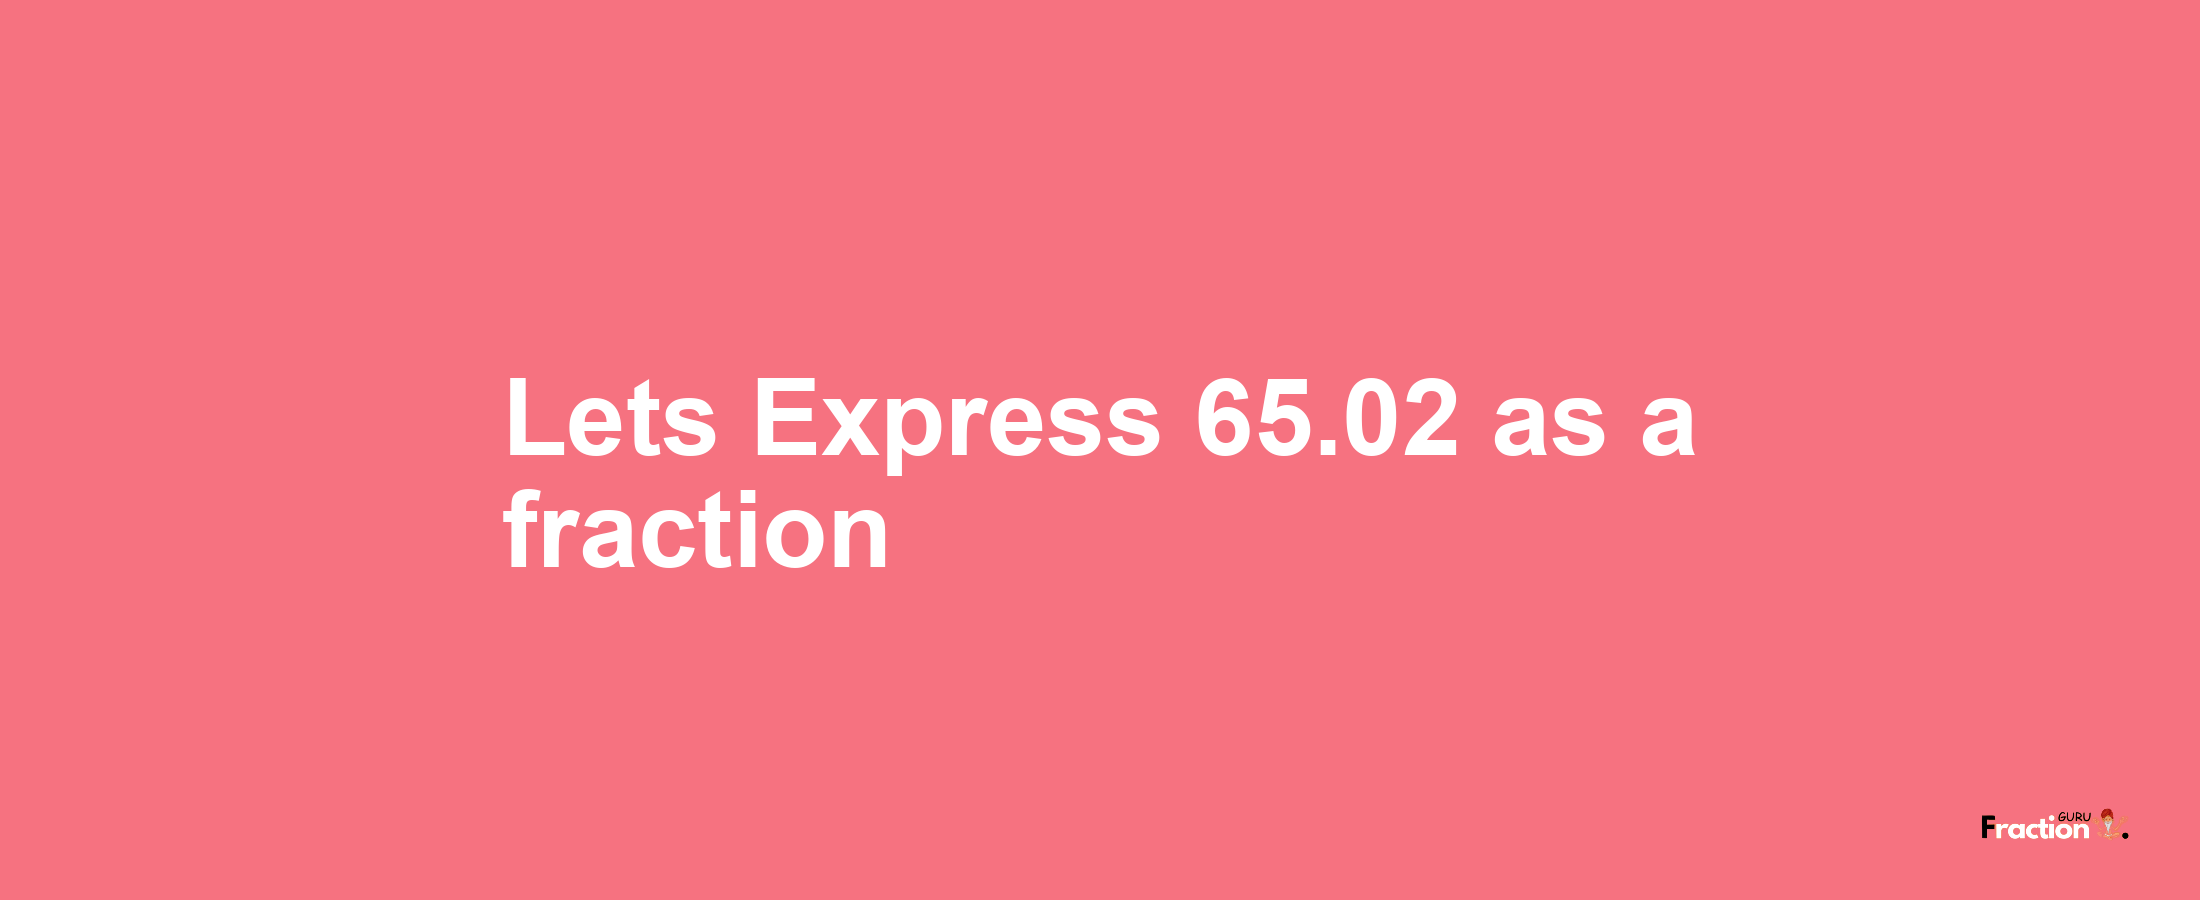 Lets Express 65.02 as afraction